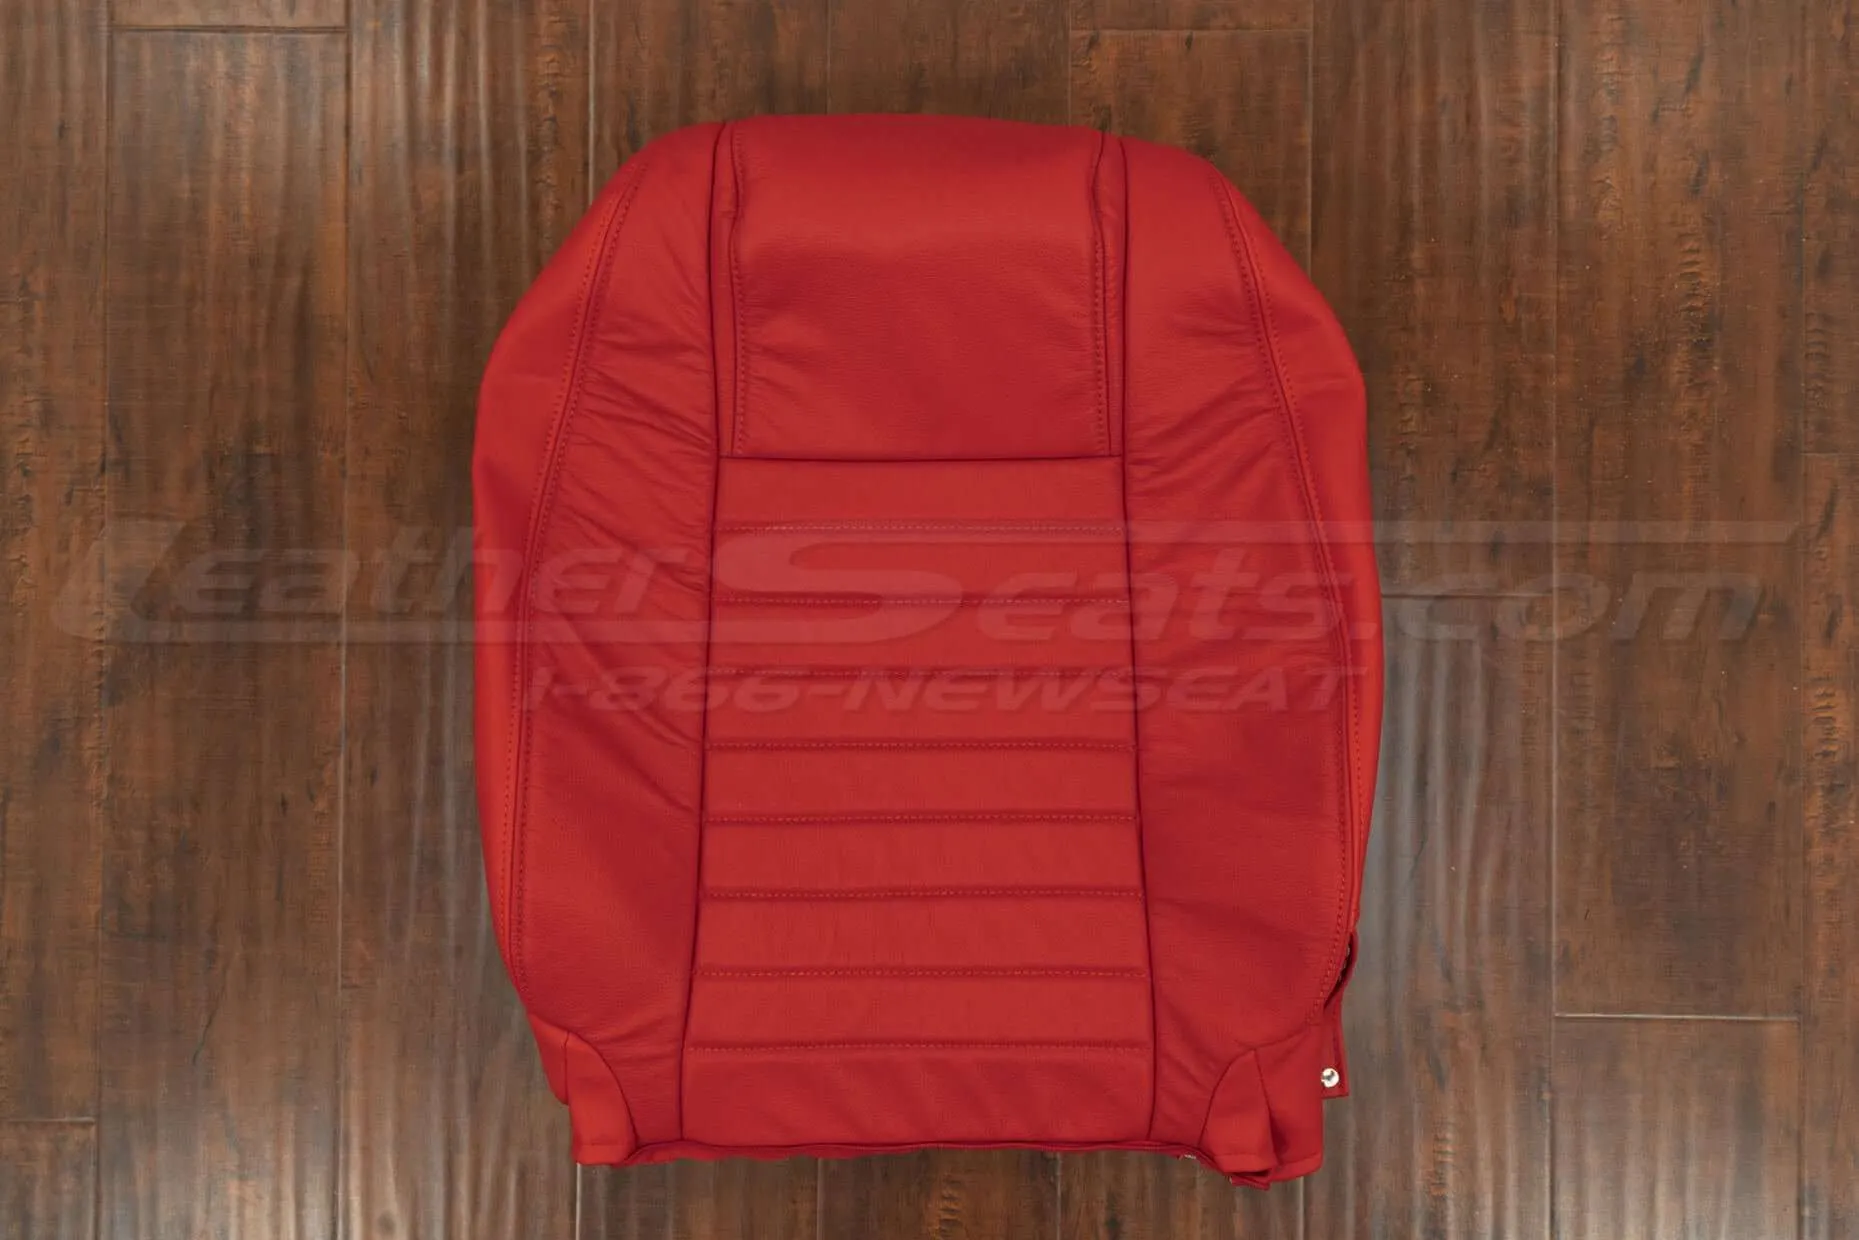 Front backrest upholstery in bright red